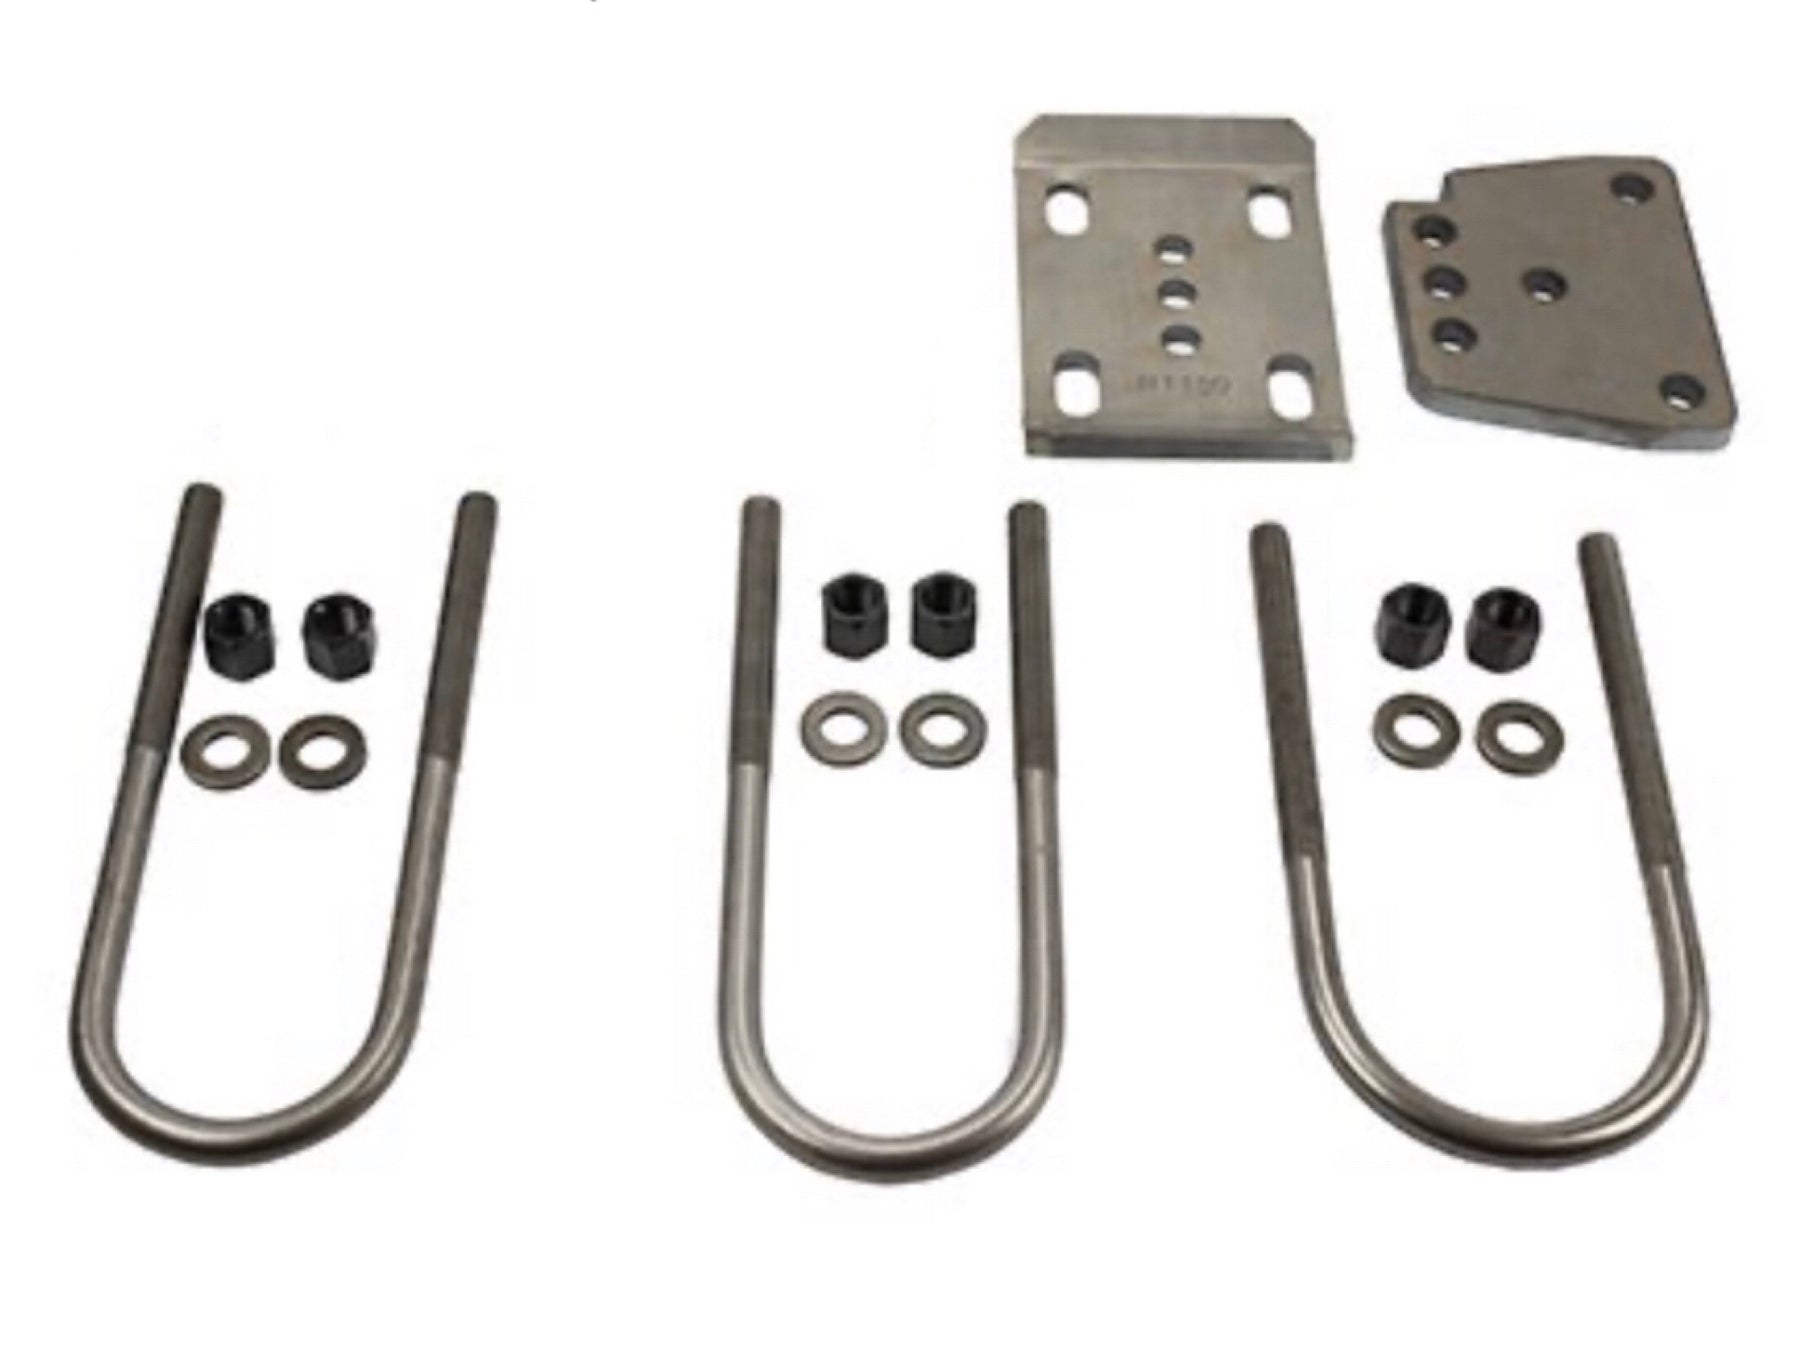 Dodge/ Front Dana 60 HD U-Bolt kit with plates and studs.